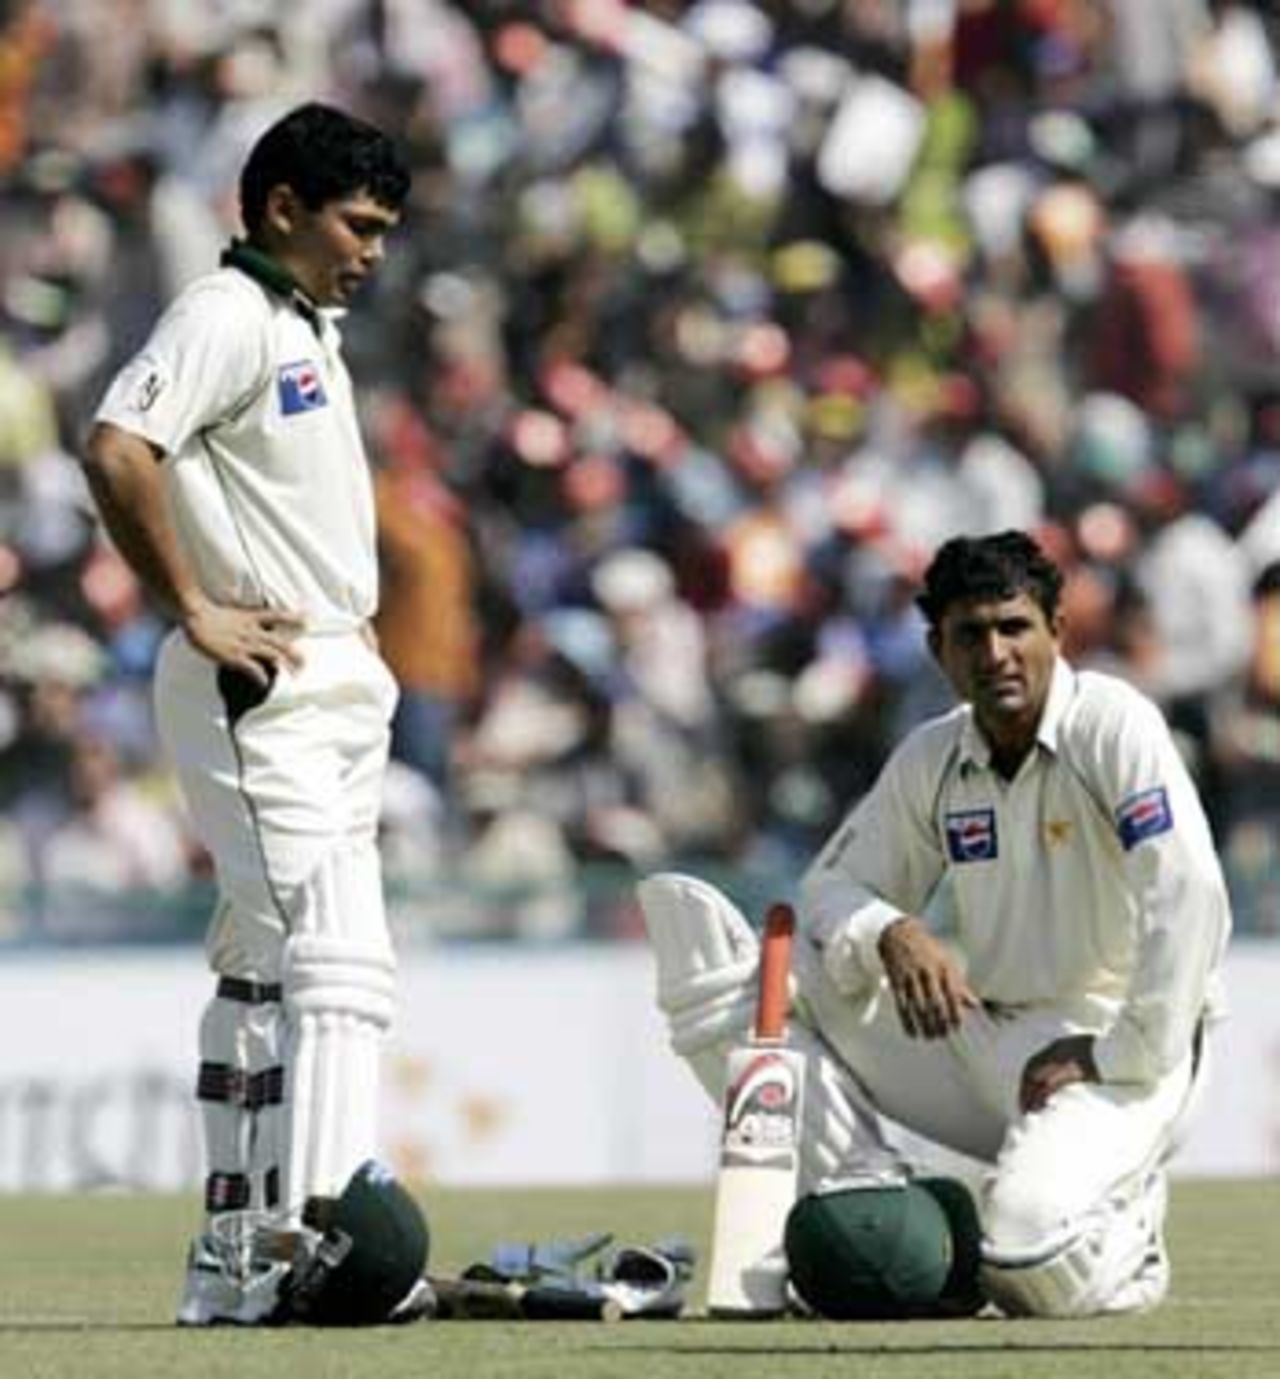 Abdul Razzaq and Kamran Akmal took time to catch their breath in the middle of a match-saving partnership, India v Pakistan, 1st Test, Mohali, 5th day, March 12, 2005